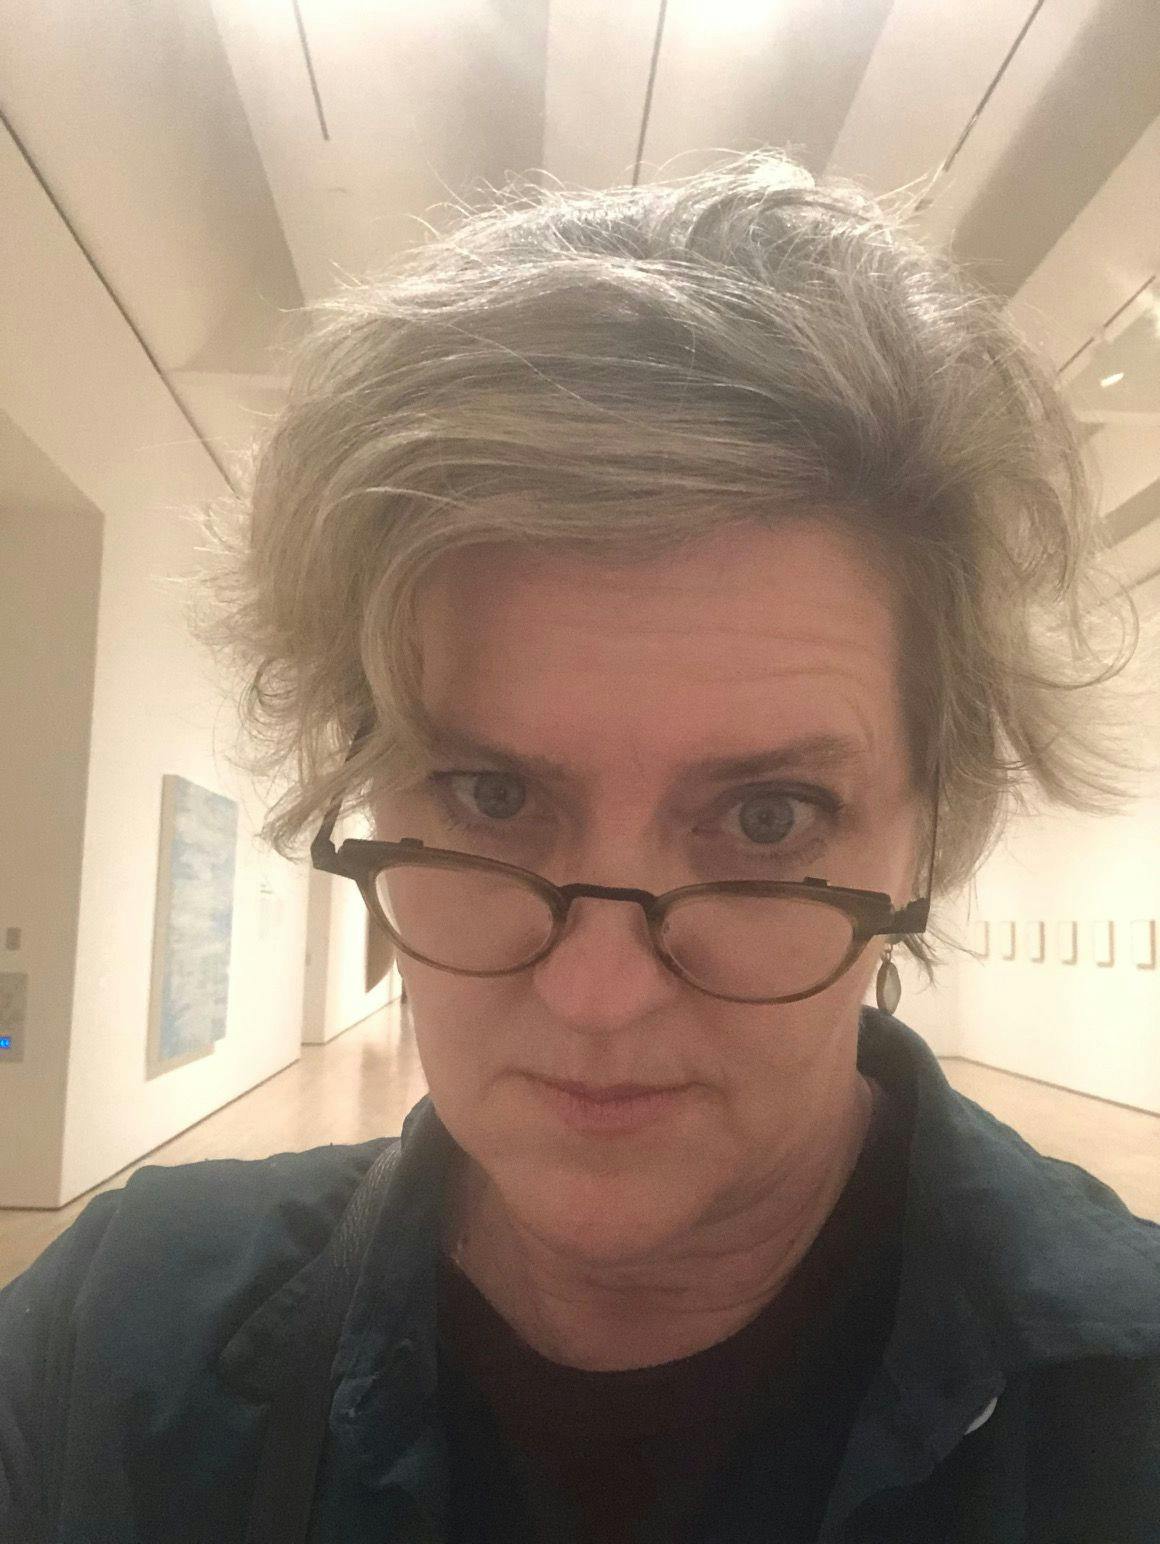 A white woman with silver hair looks over her wireframe glasses and into the camera. She wears a dark collared shirt, and stands within a warmly lit gallery space.